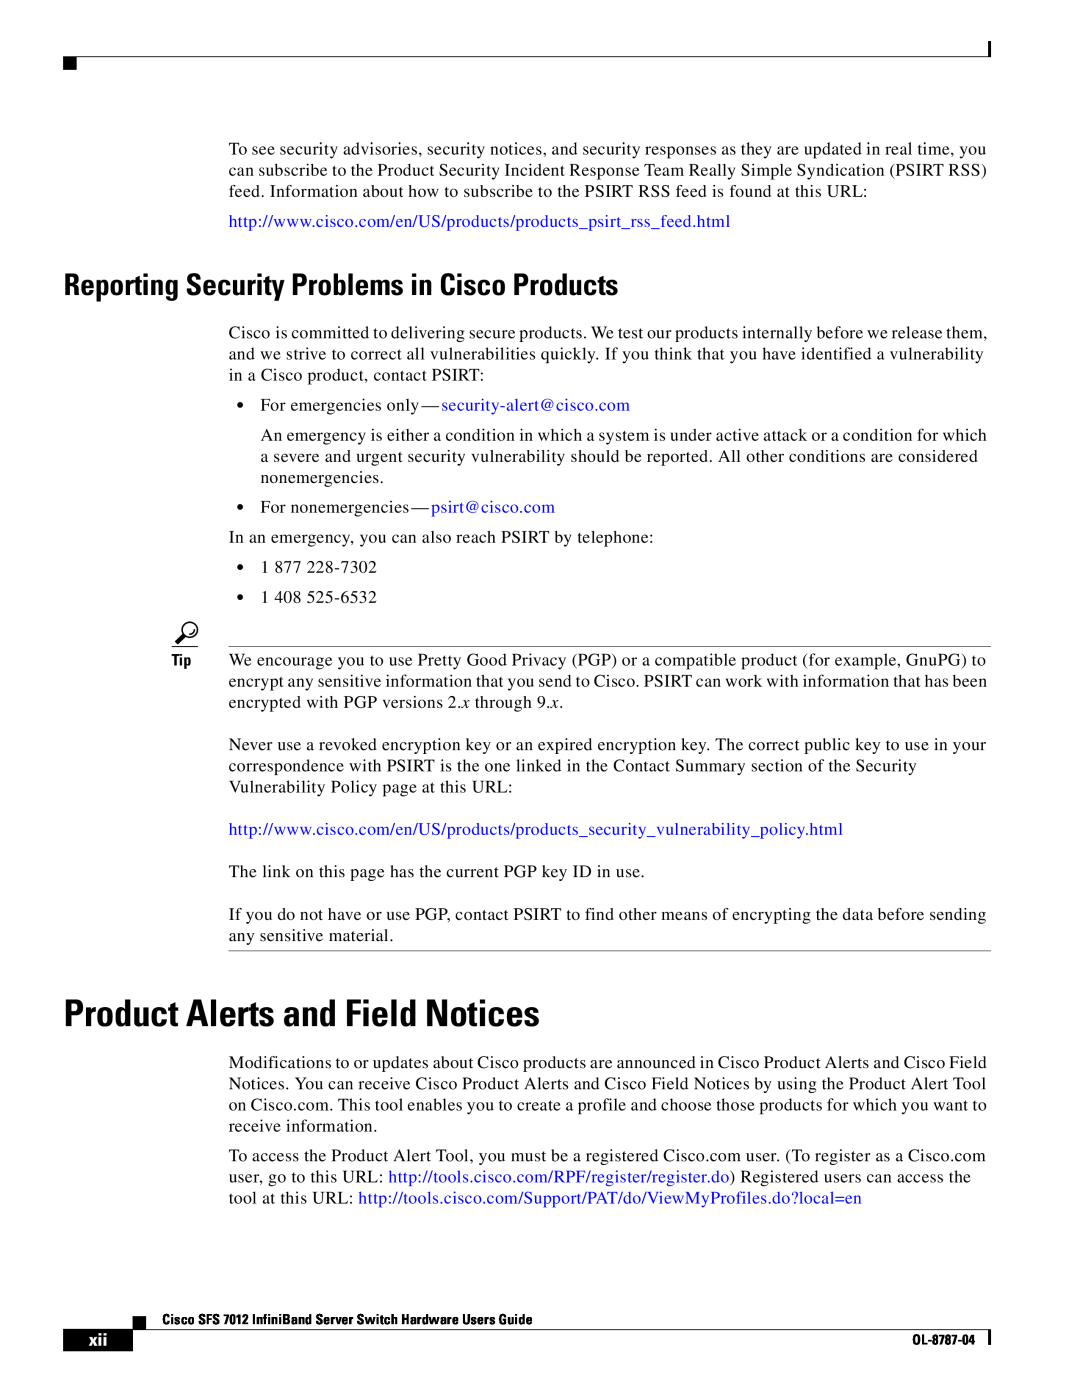 Cisco Systems SFS 7012 manual Product Alerts and Field Notices, Reporting Security Problems in Cisco Products 